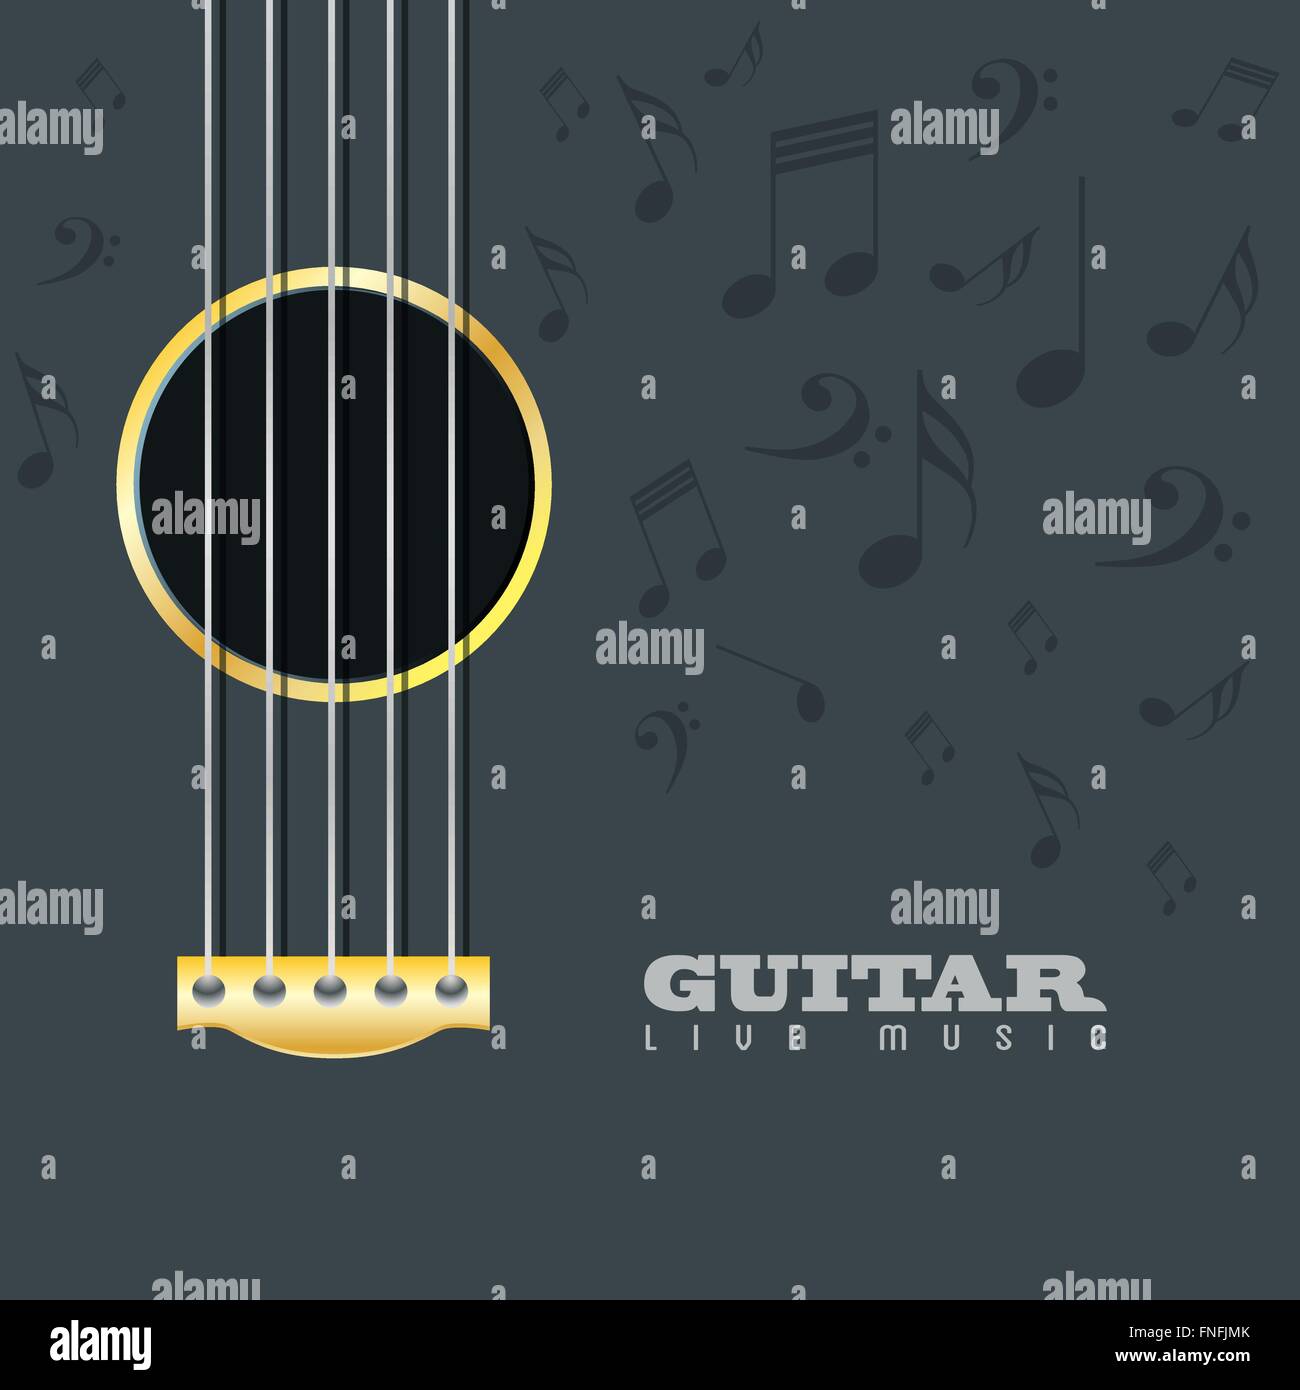 Guitar live music poster background Stock Vector